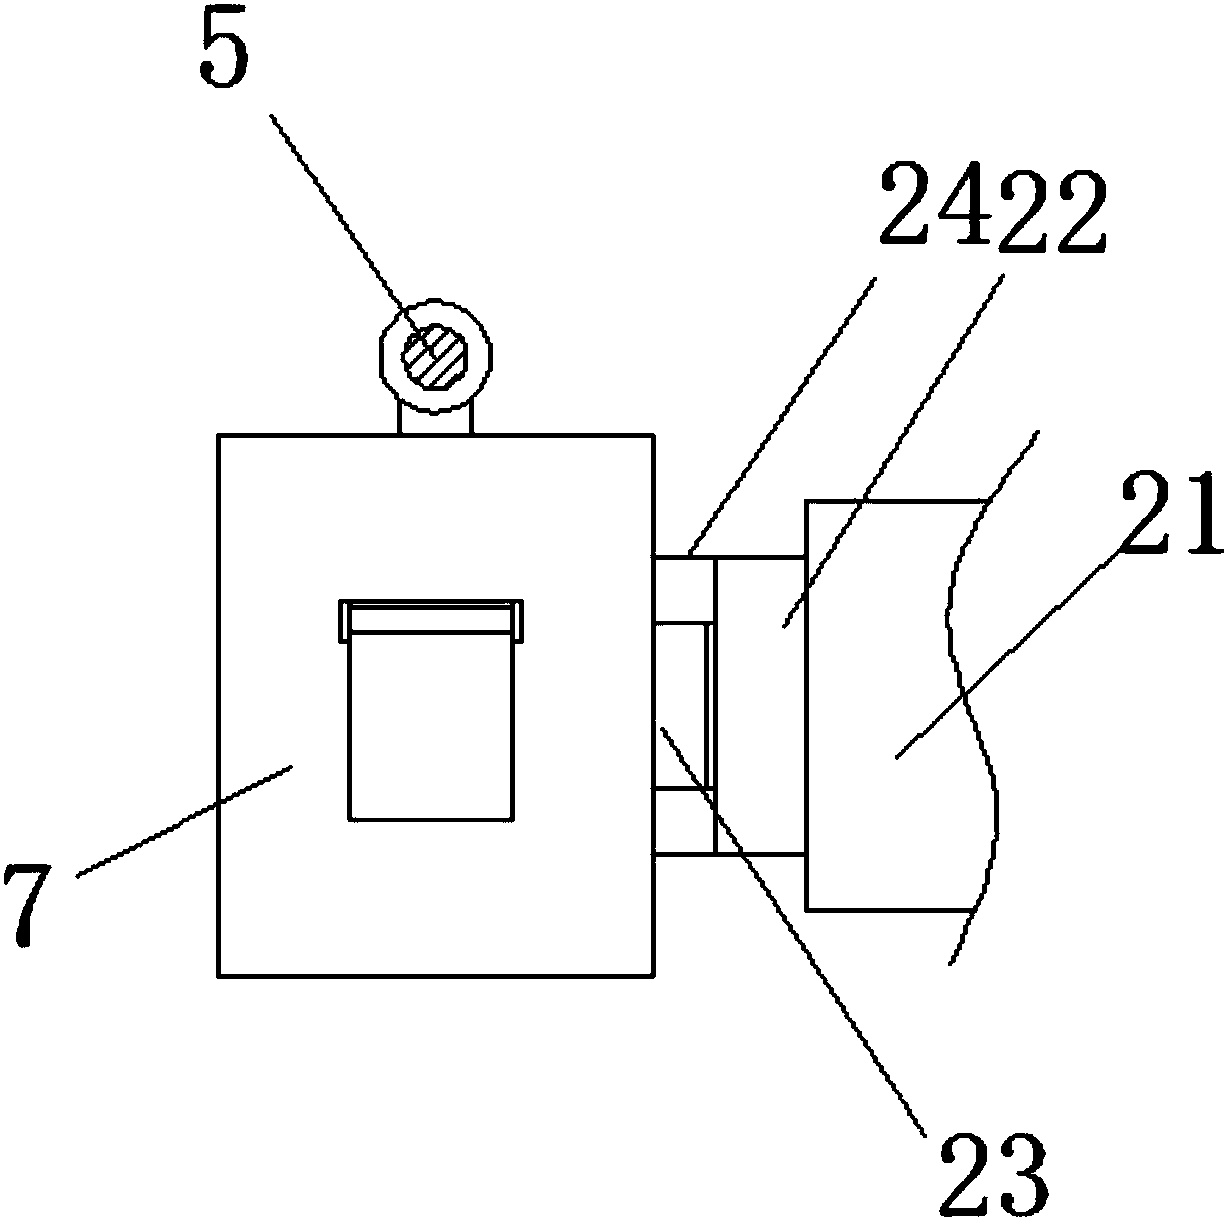 Automated stratified sampling and multi-point detection water quality detection device